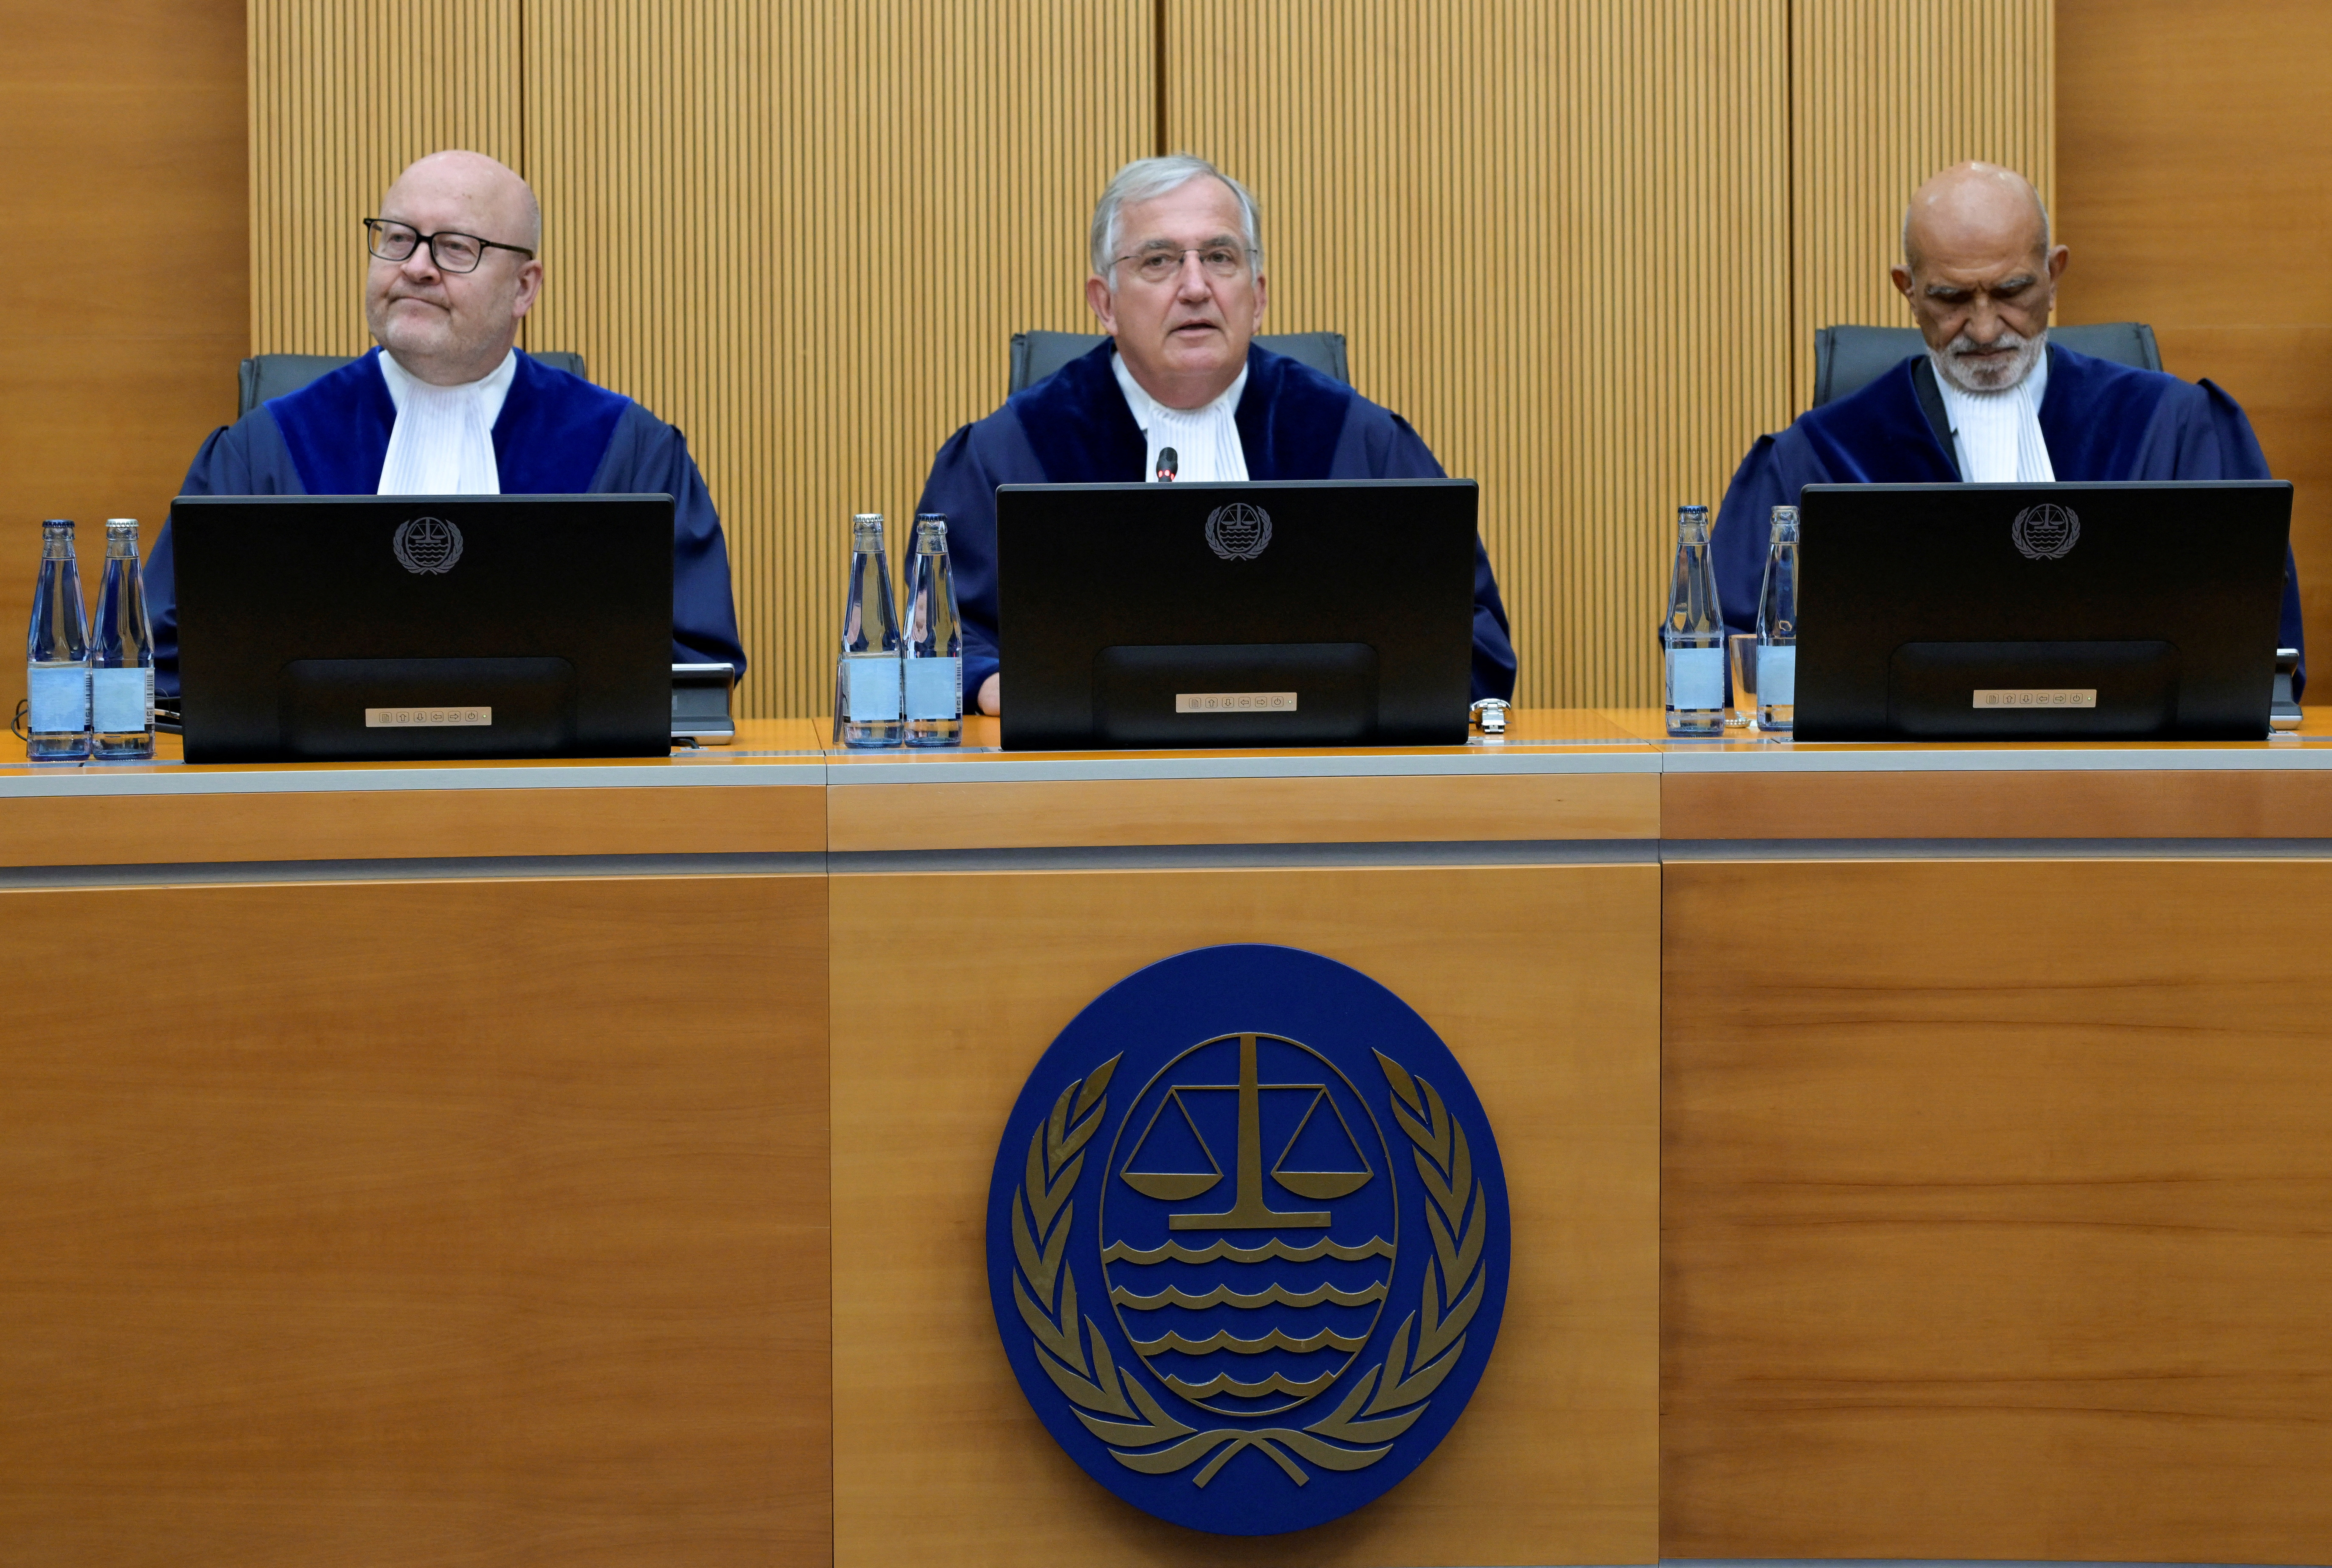 The International Tribunal for the Law of the Sea (ITLOS), gave its climate advisory in Hamburg